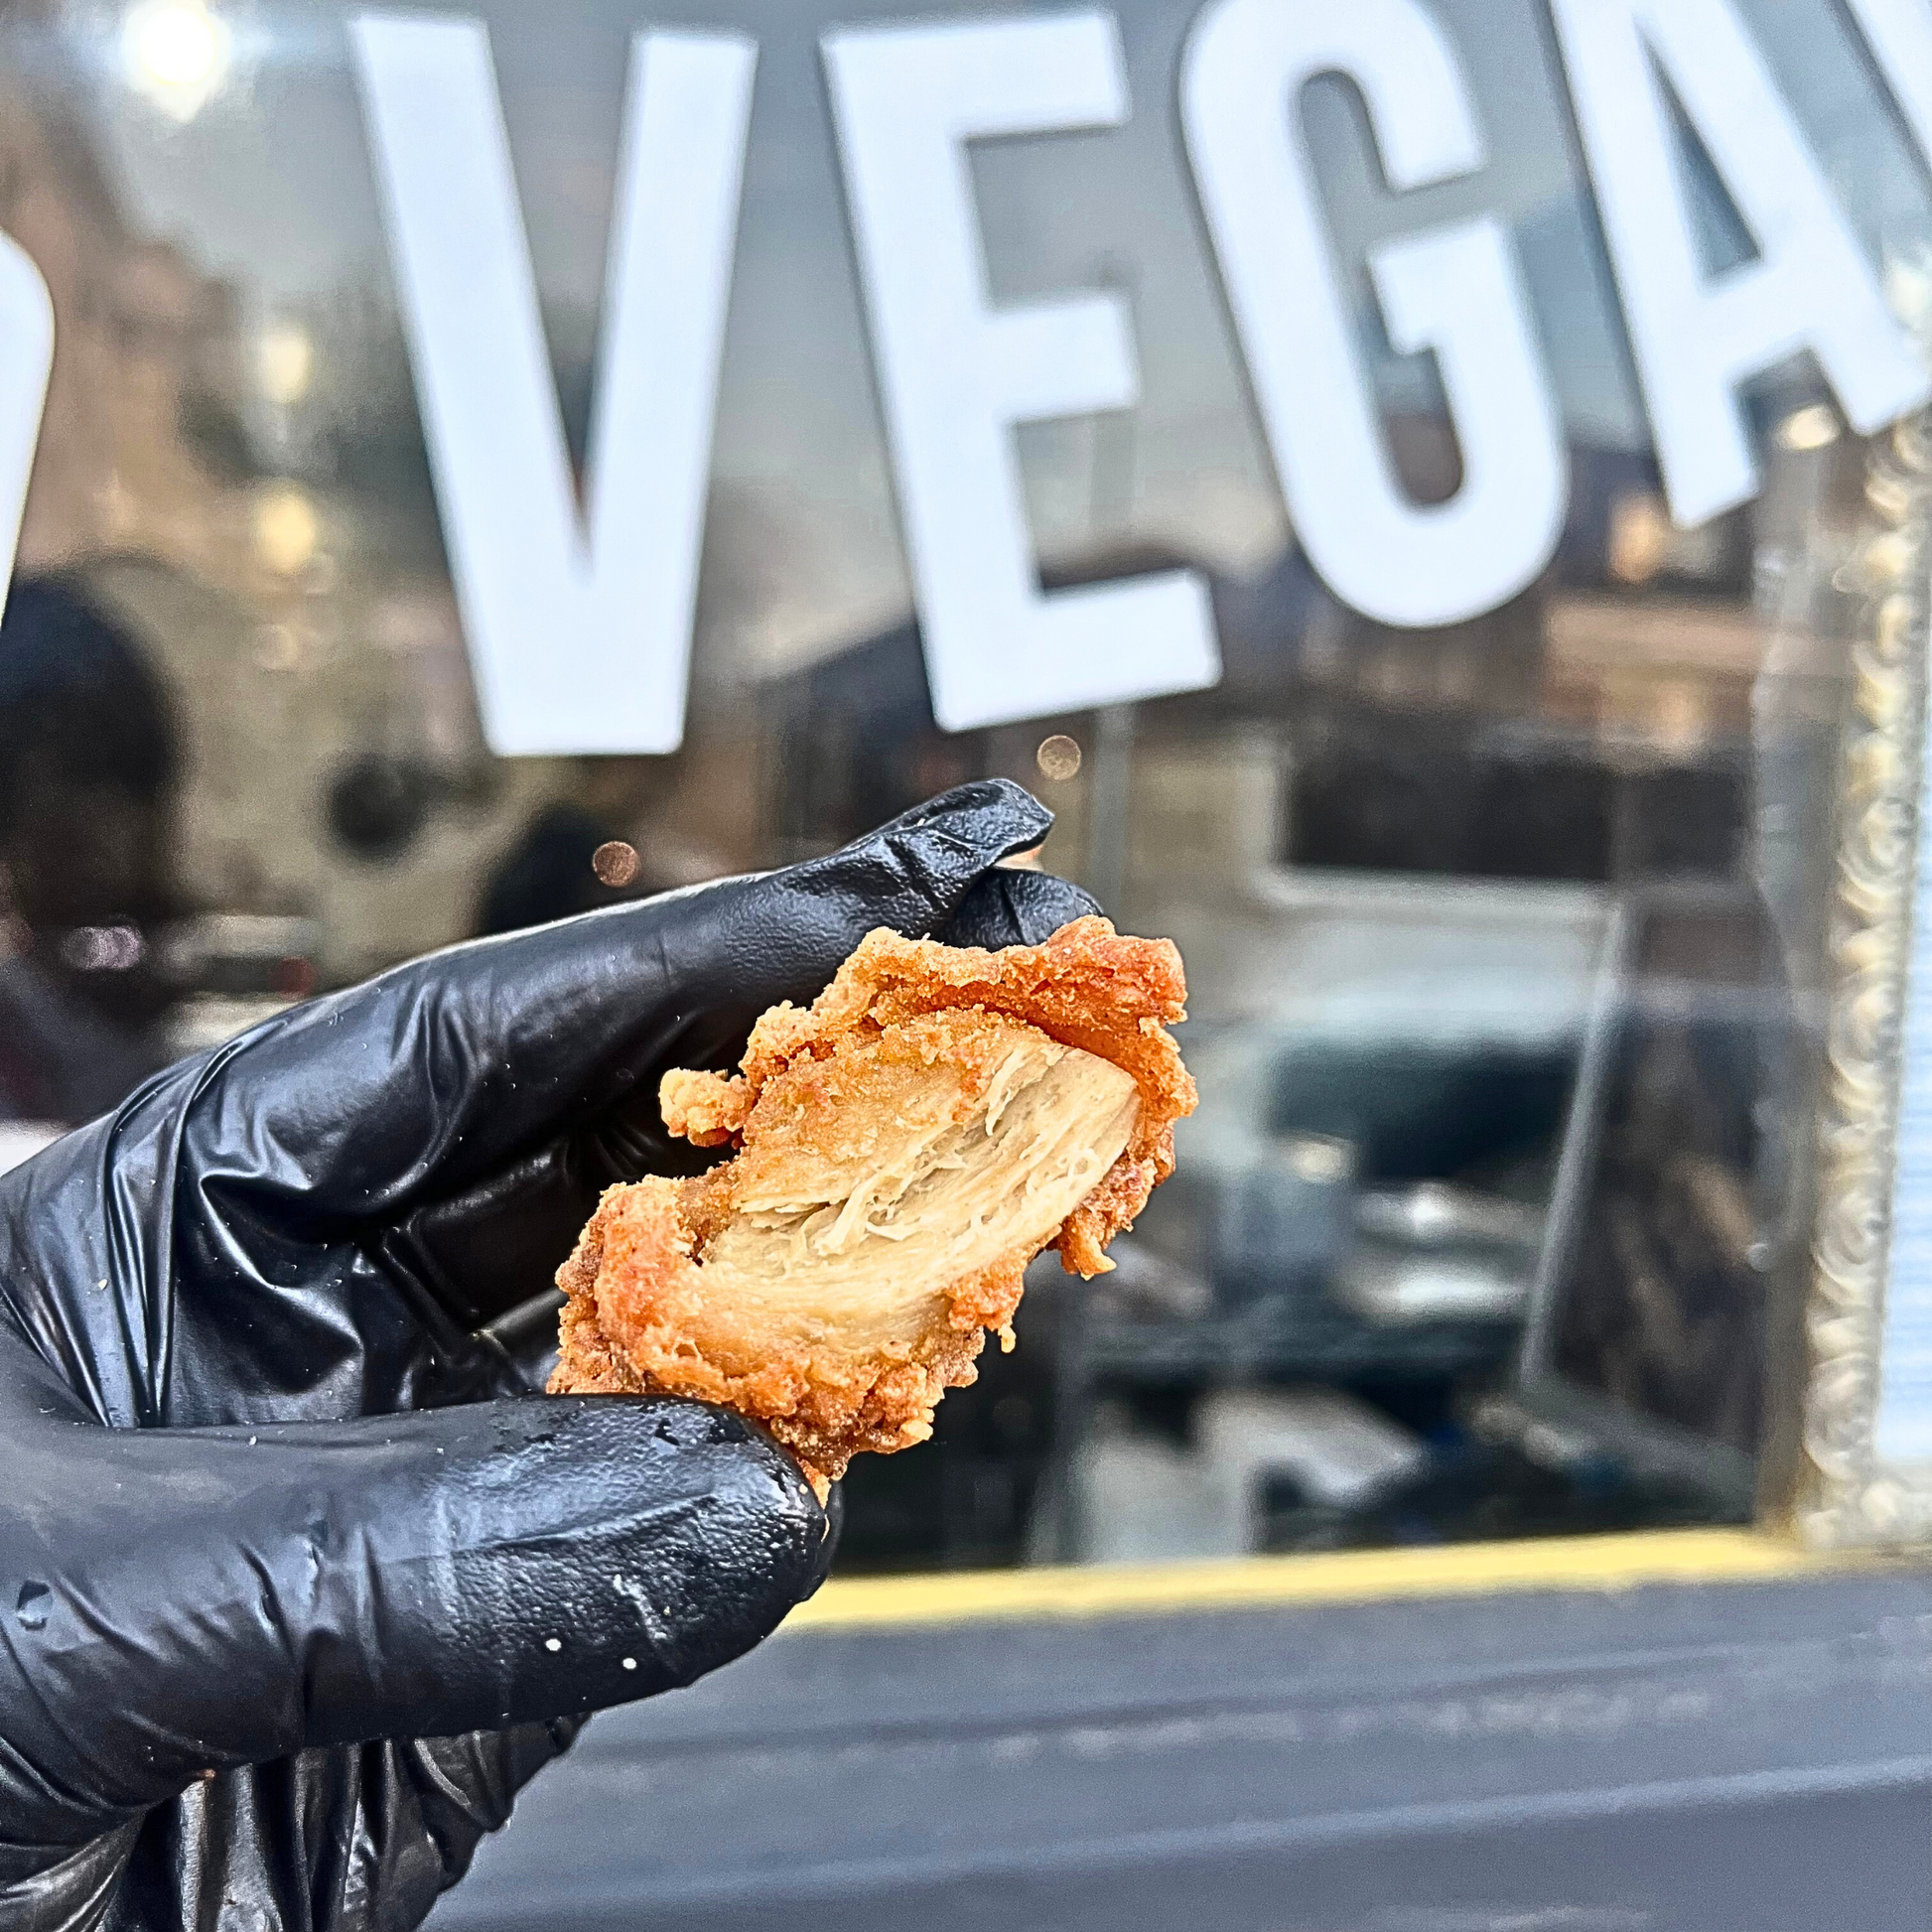 a hand with black gloves showing our vegan chicken realistic texture, it is stringy and juicy. It is has a crispy fried coat like KFC and juicy inside. There is also a big vegan sign behind, serving suggestion.